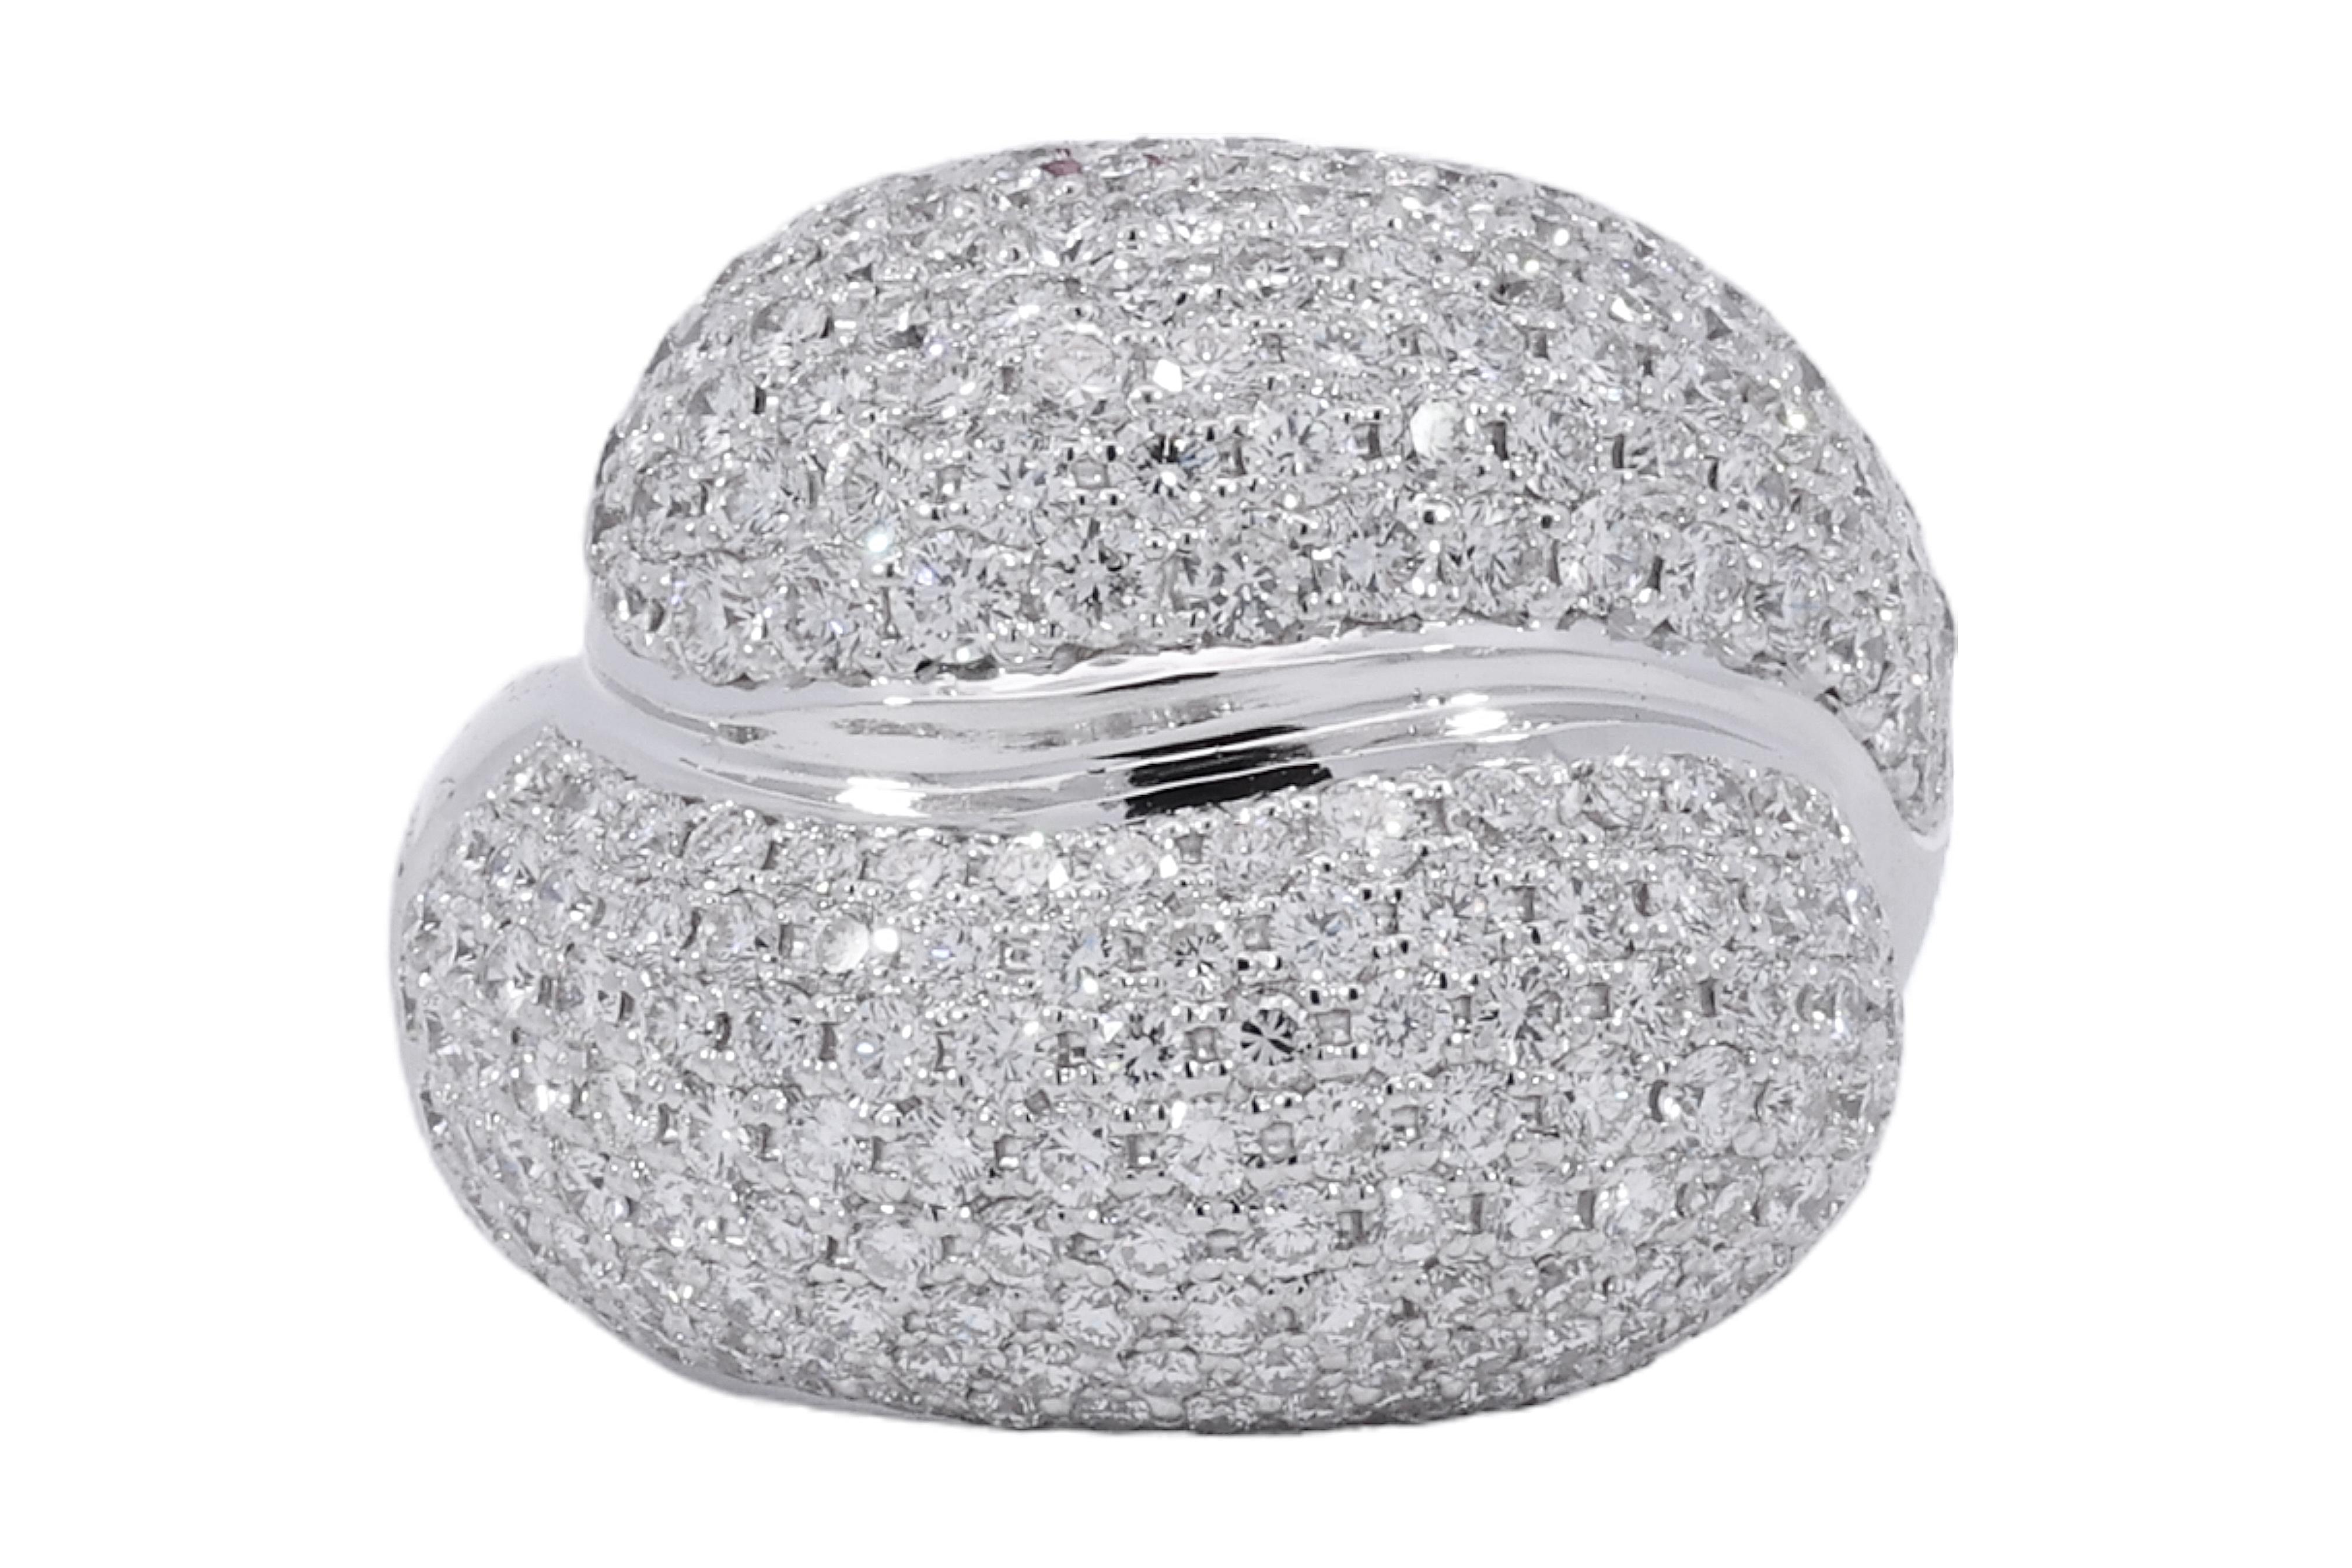 Gorgeous 18kt White Gold Toi & Moi  Ring Pavé Set with 4.95ct. Diamonds

Diamonds: brilliant cut diamonds together approx. 4.95 ct.  

Material: 18kt White gold

Ring size: 56 EU / 7.5 US 5 can be resized fro free)

Total weight: 20.6 gram / 0.730